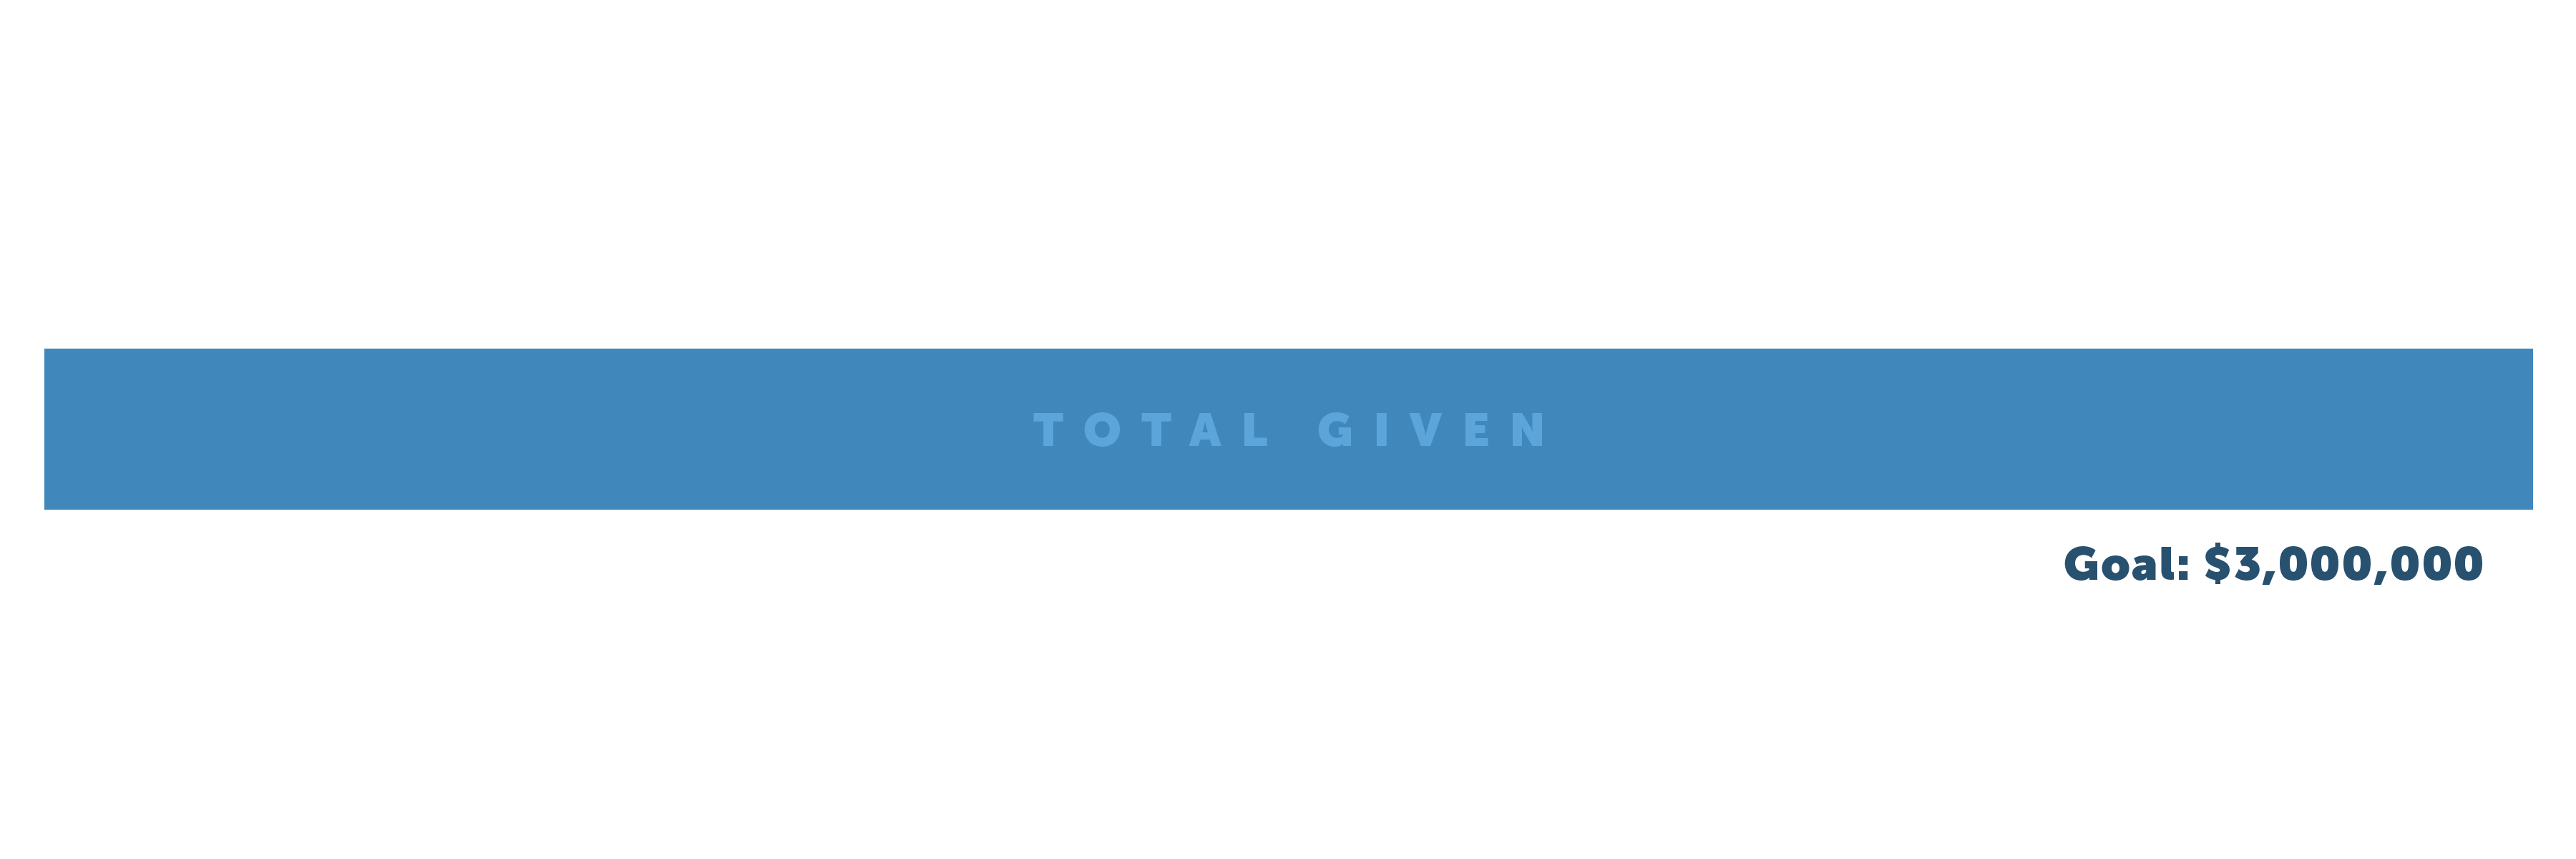 Total-given.png